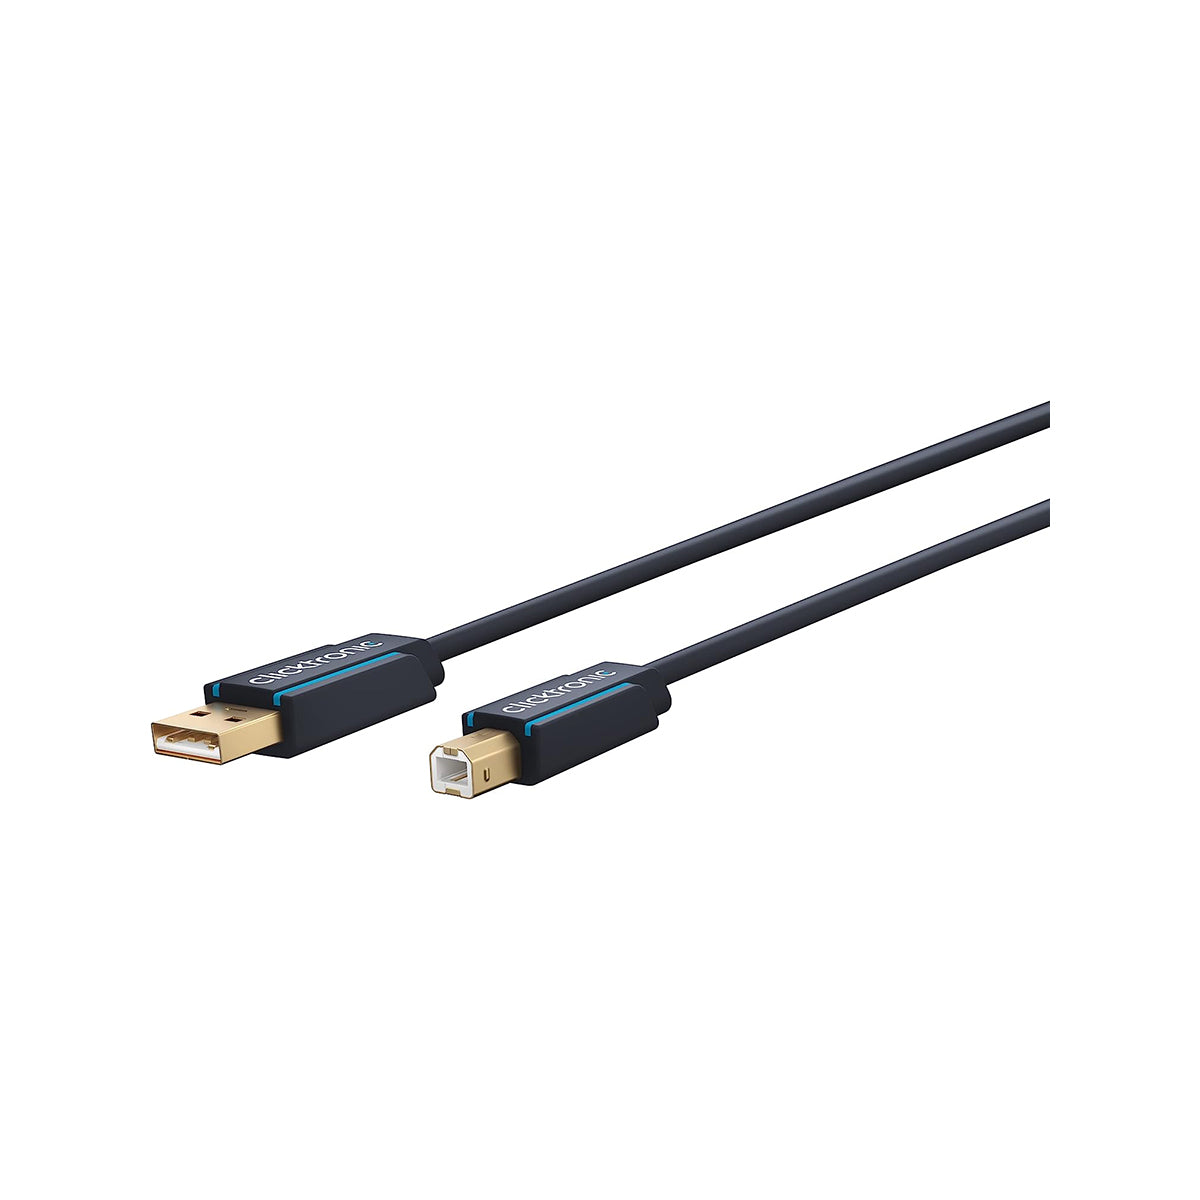 Clicktronic USB A to USB B Cable 2.0 1.8m